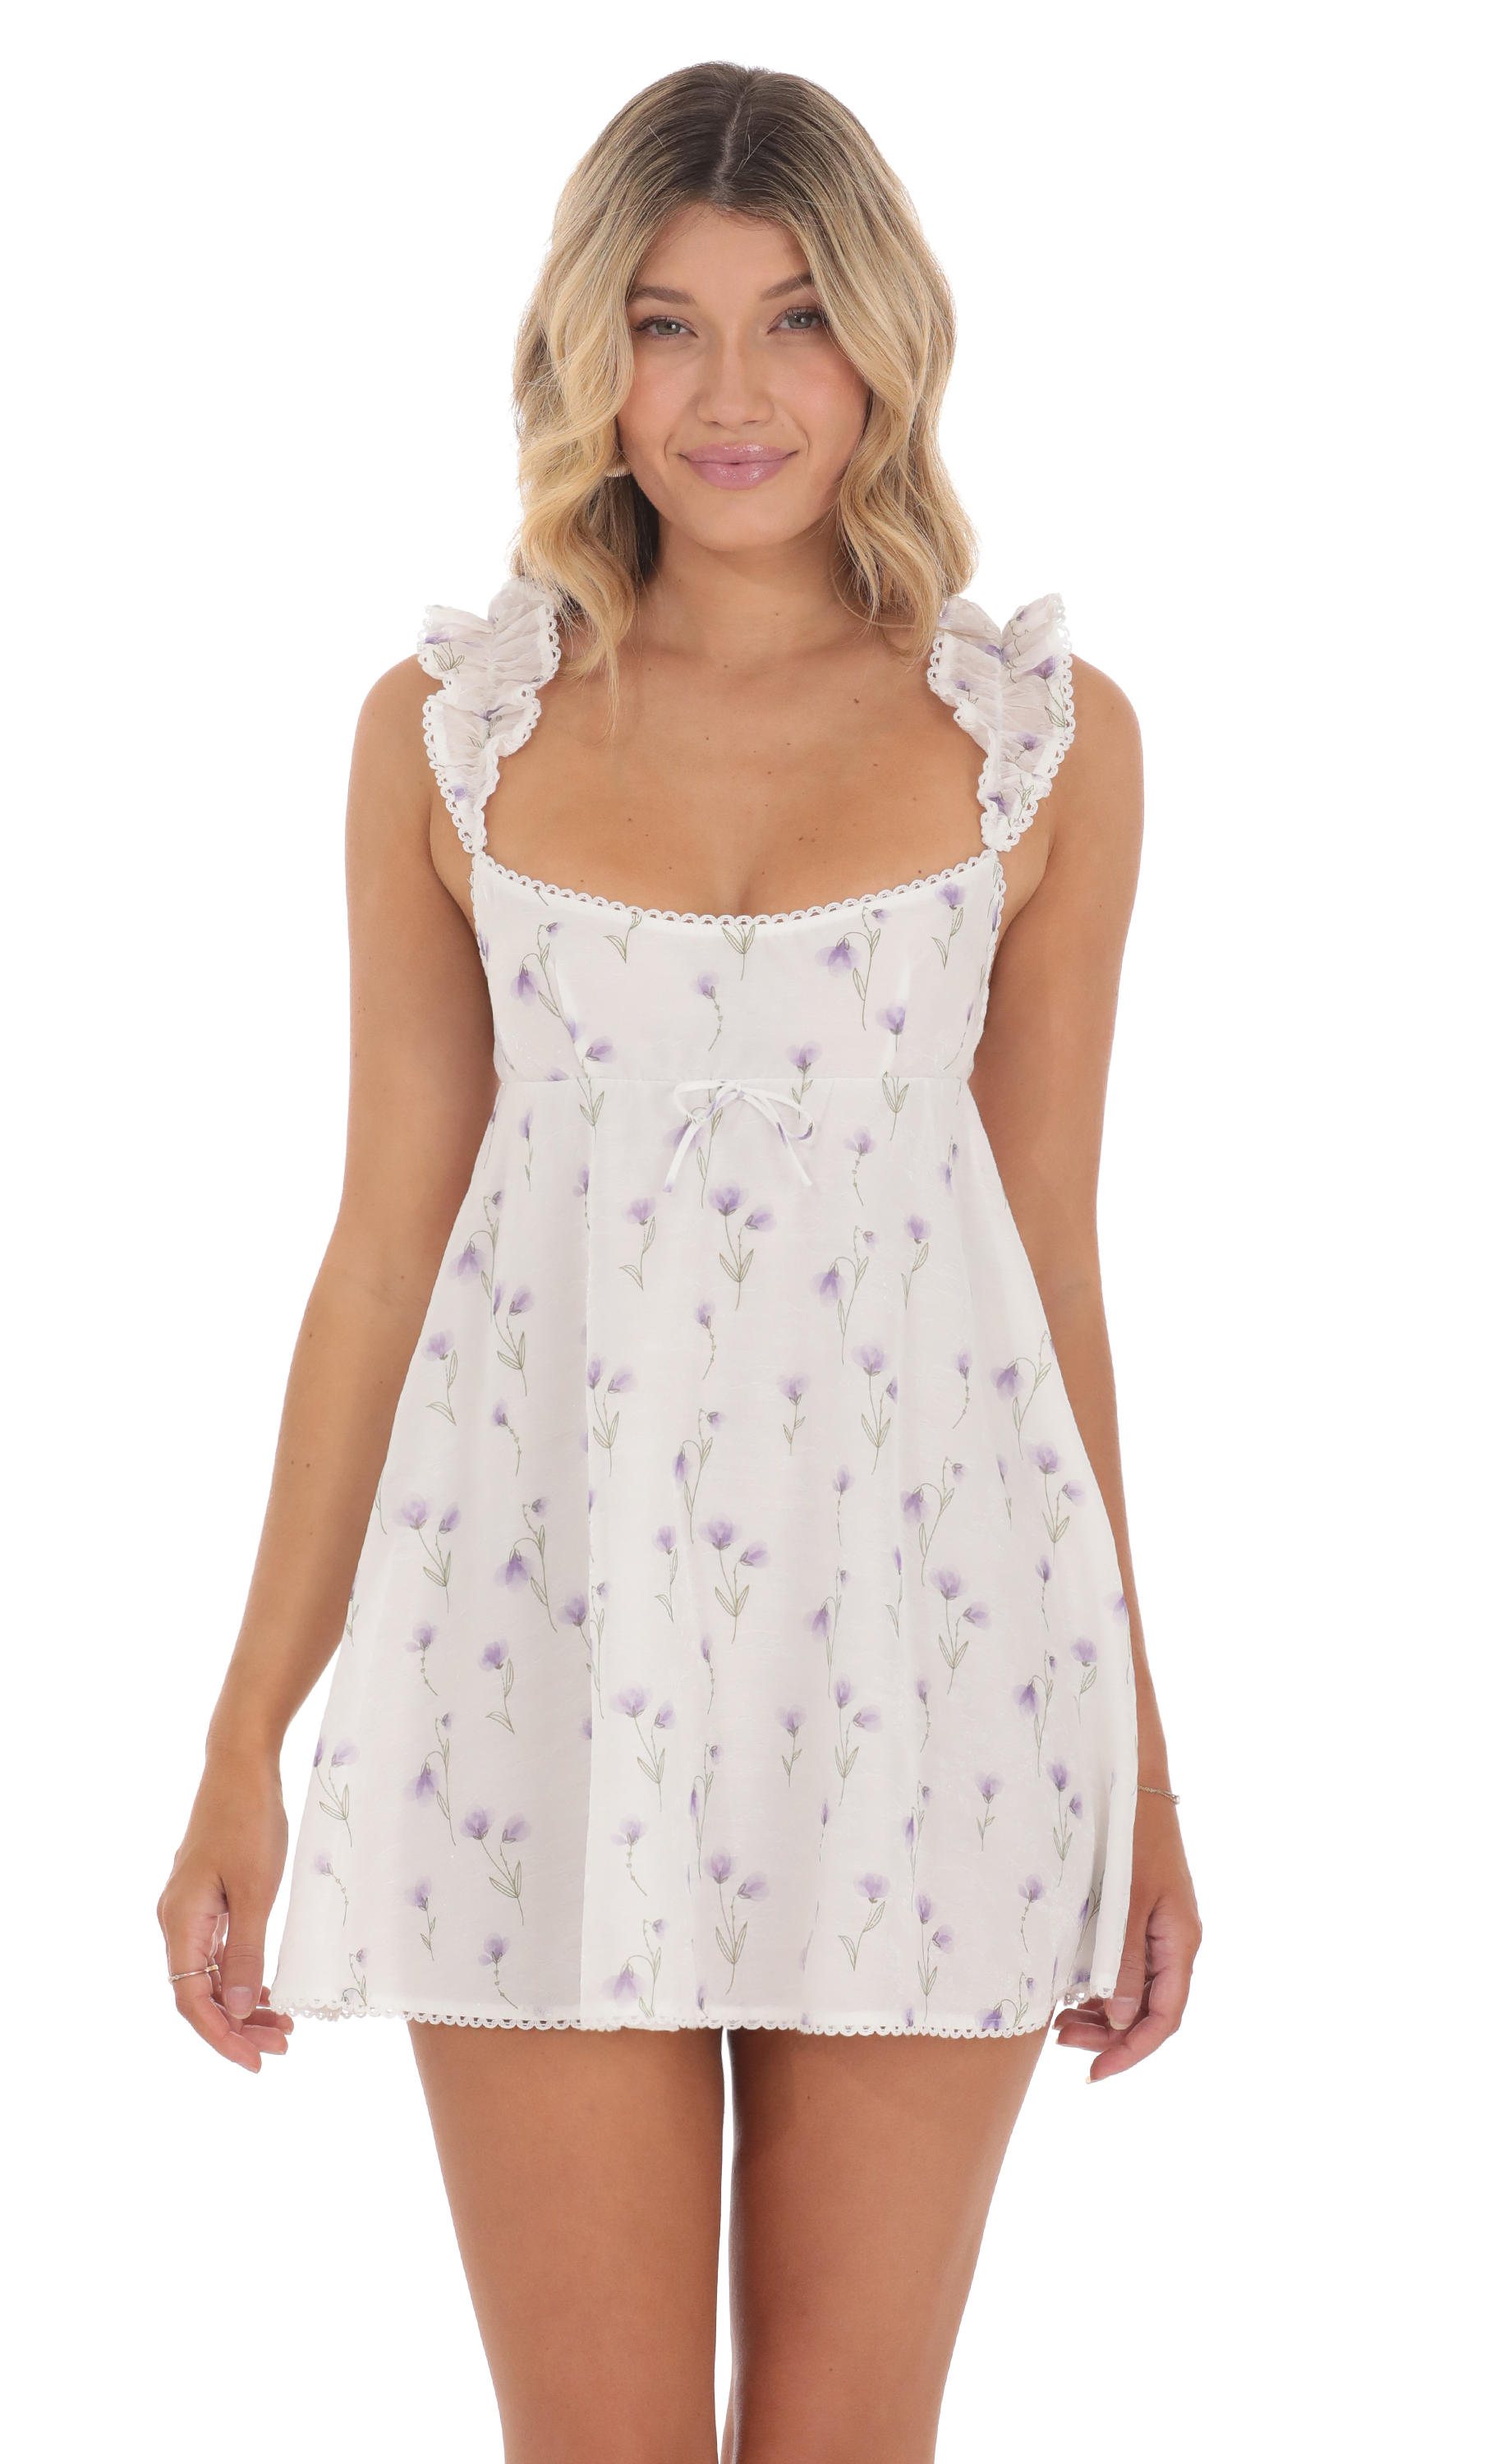 Satin Floral Babydoll Dress in White